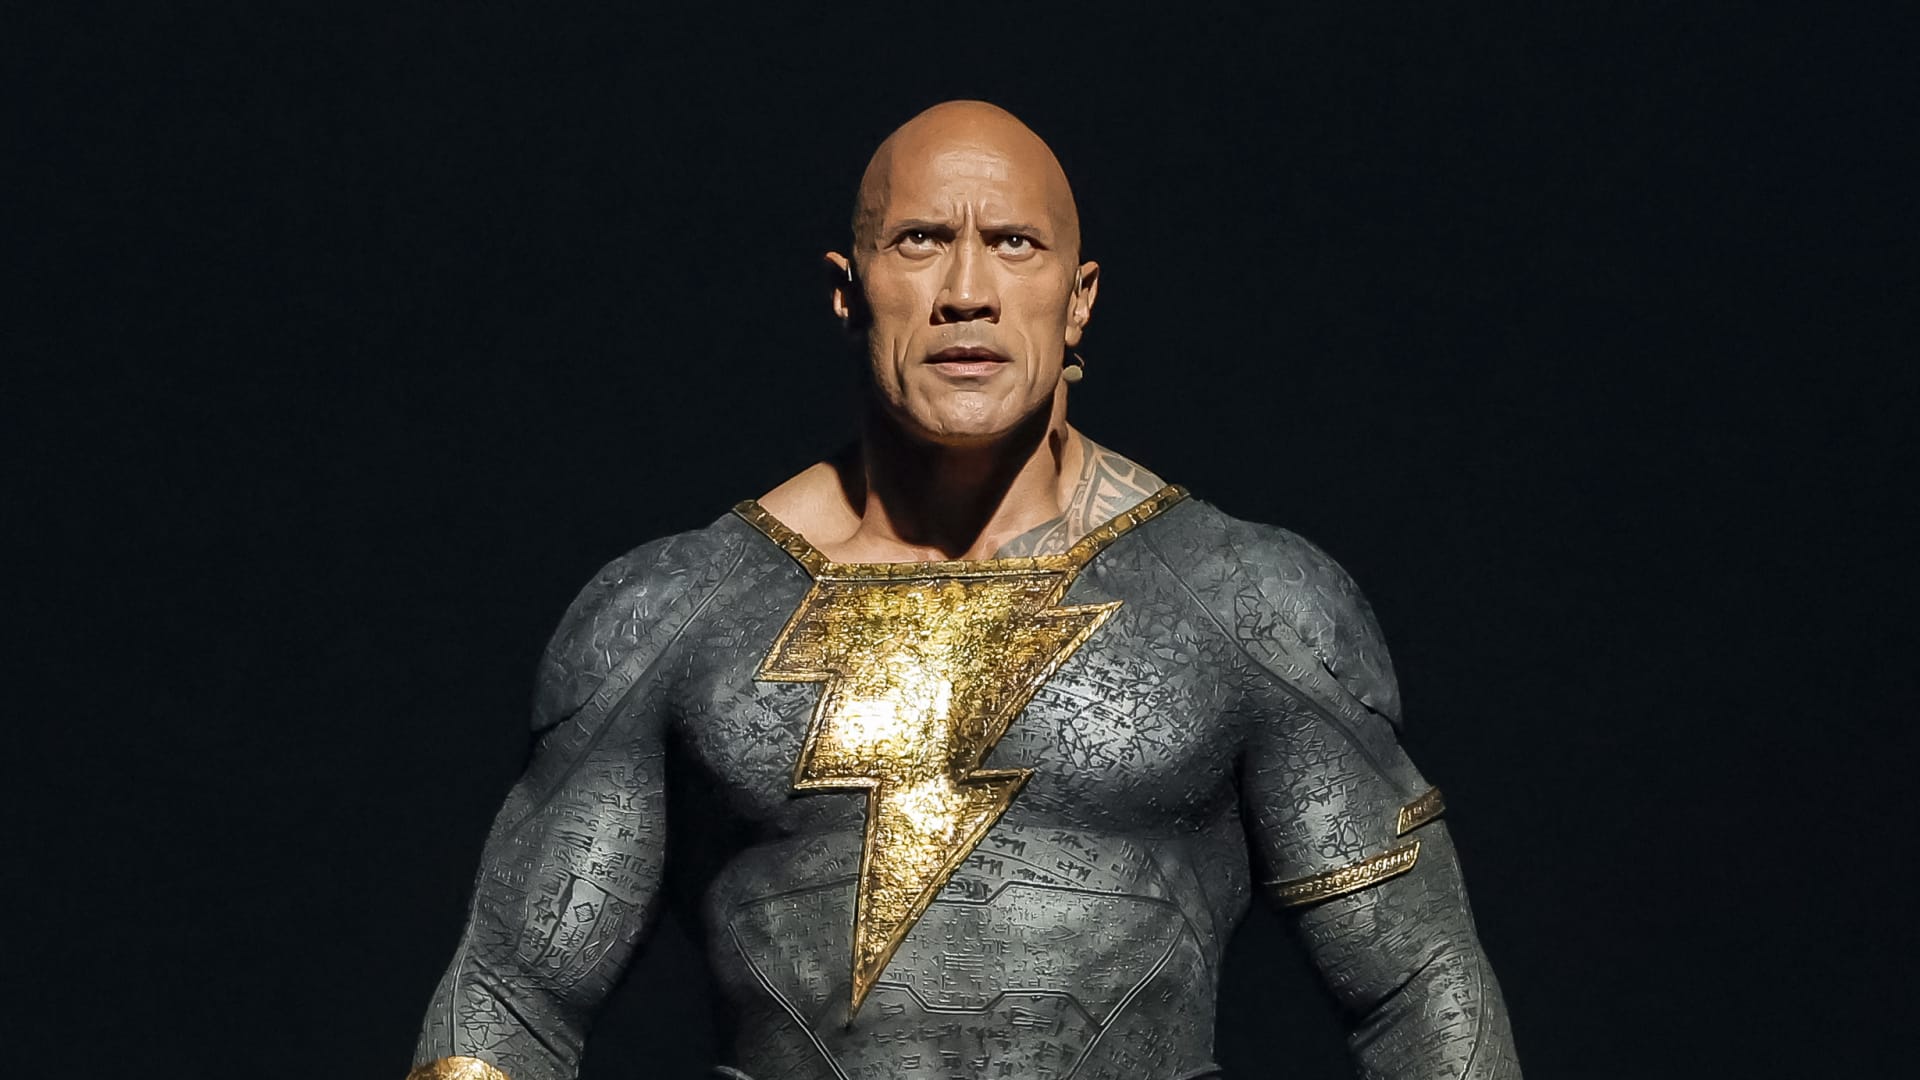 Dwayne Johnson dressed as Black Adam speaks onstage at the Warner Bros. theatrical session with 